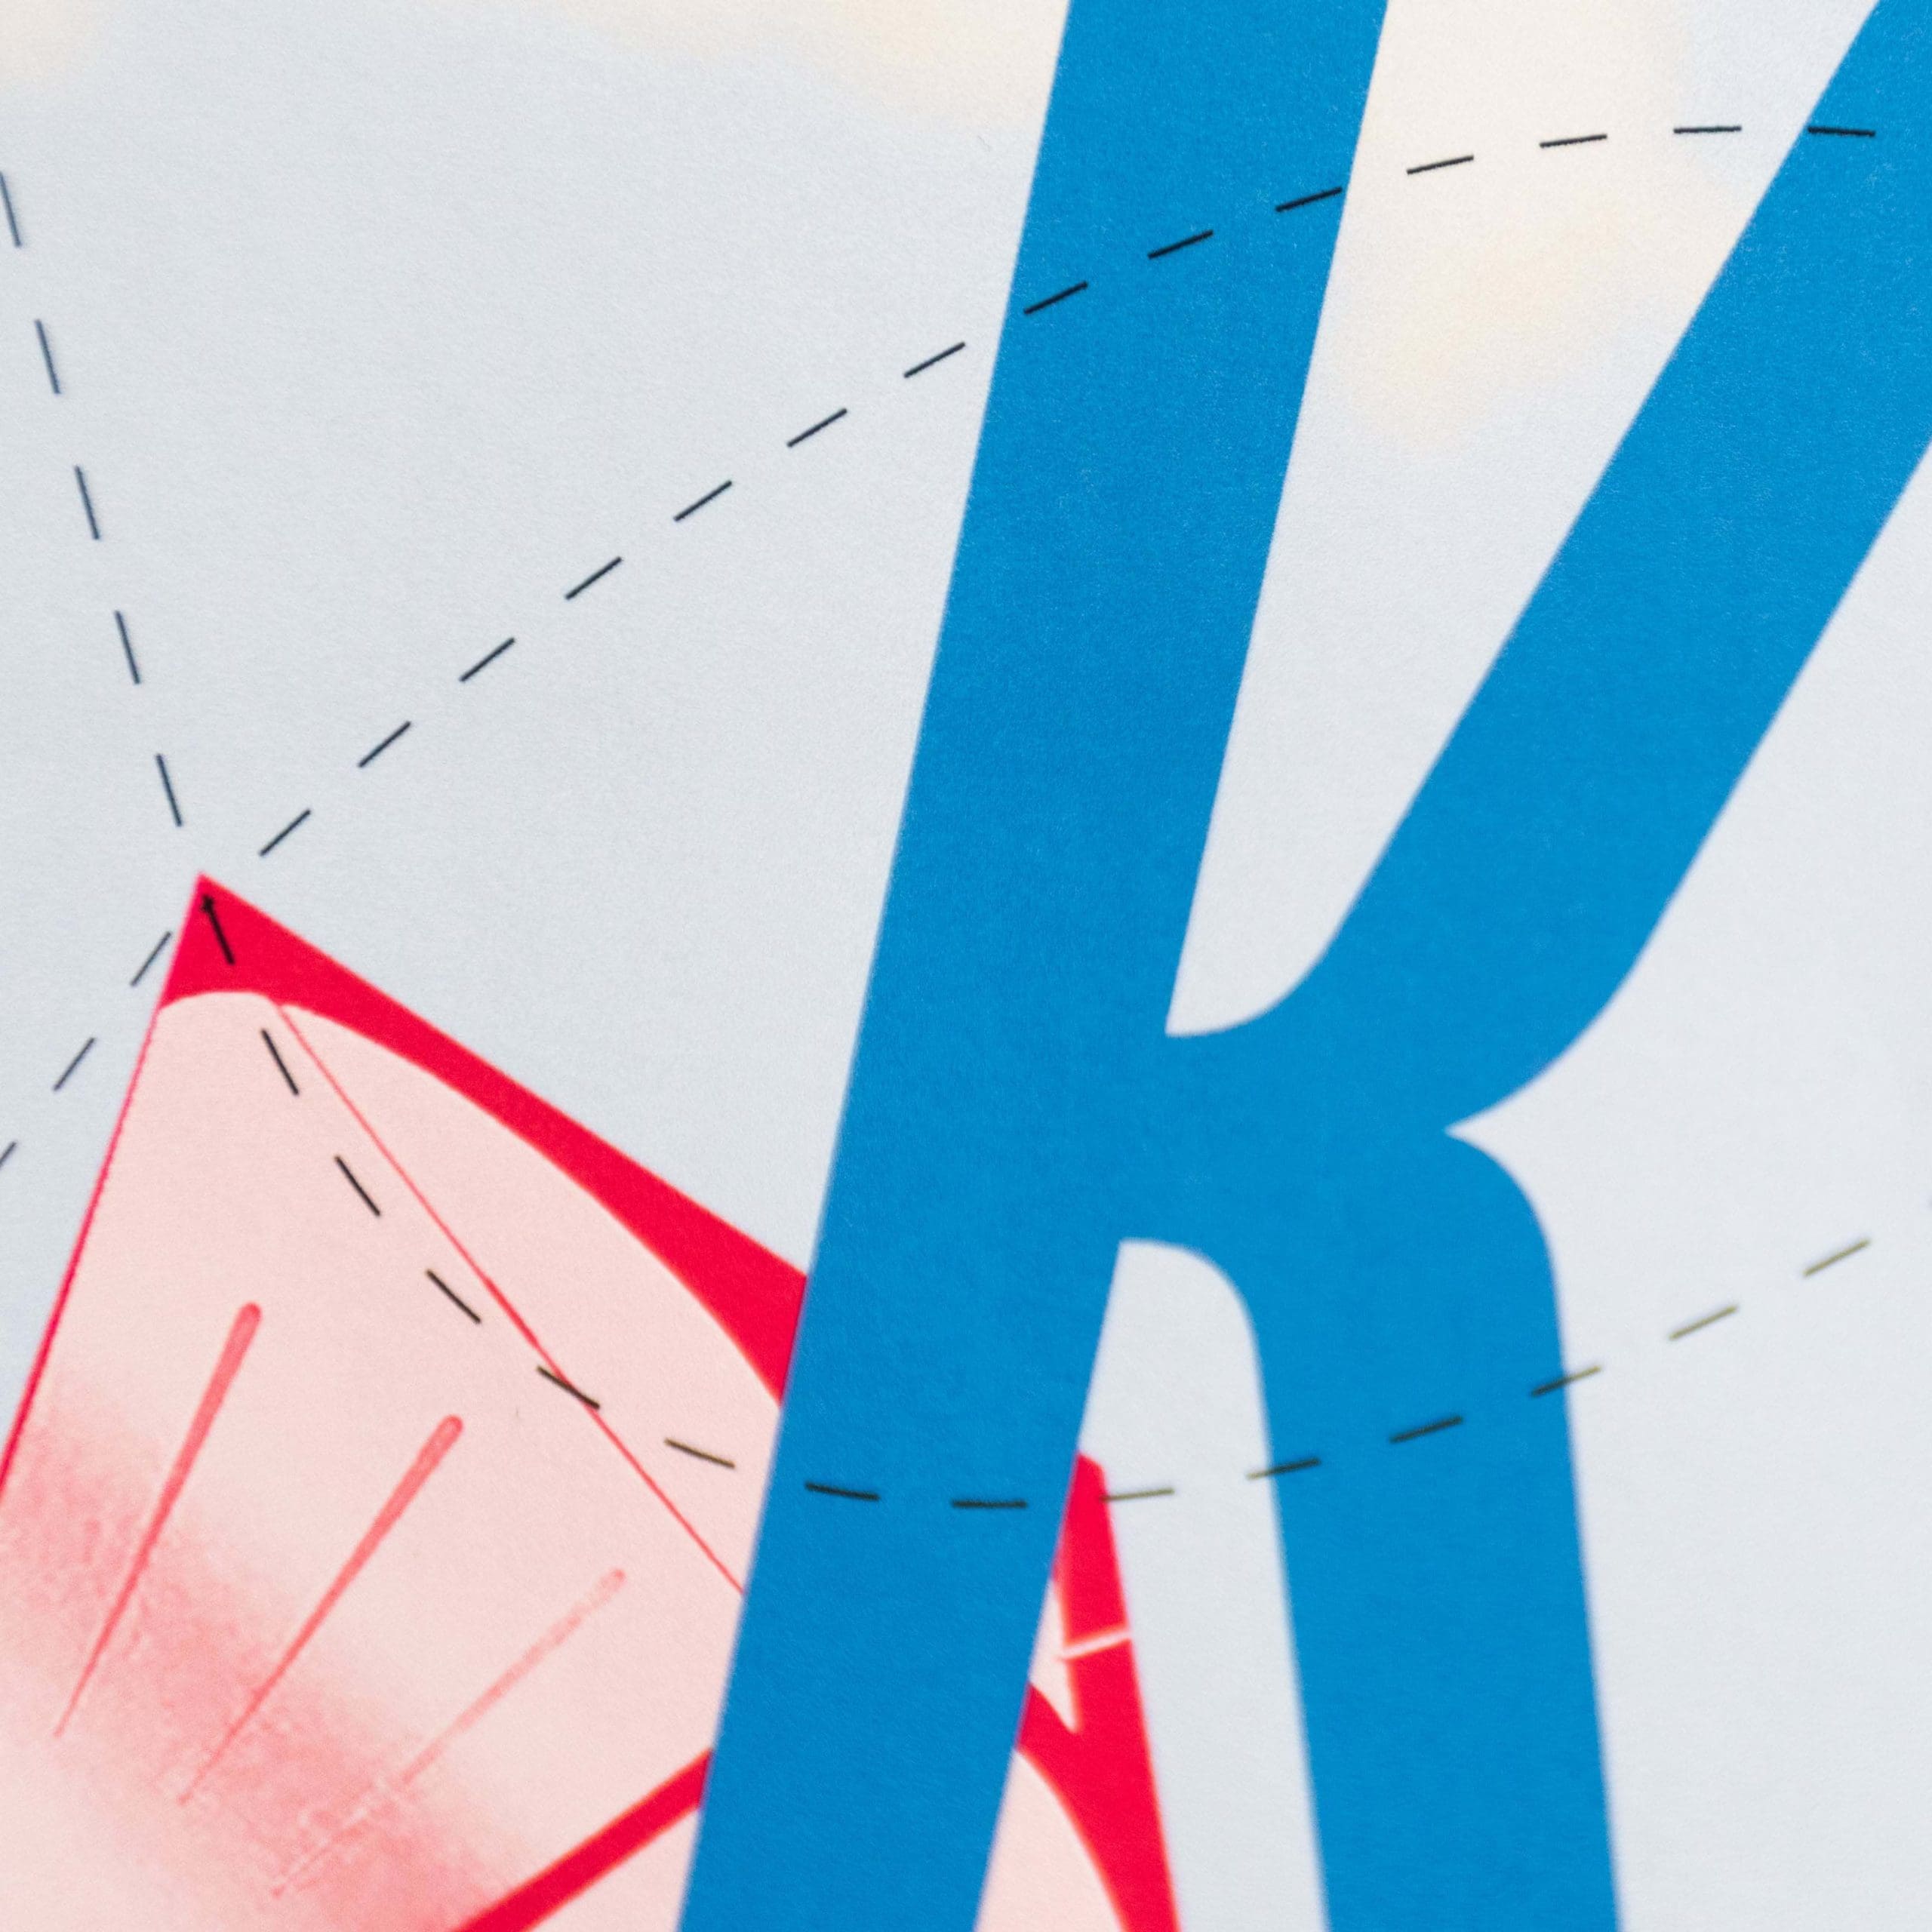 Close-up of a poster that depicts a large blue K spanning from the top to the bottom of the page behind two curved black dashed lines. In the background is a red decorative shape. On a white background.